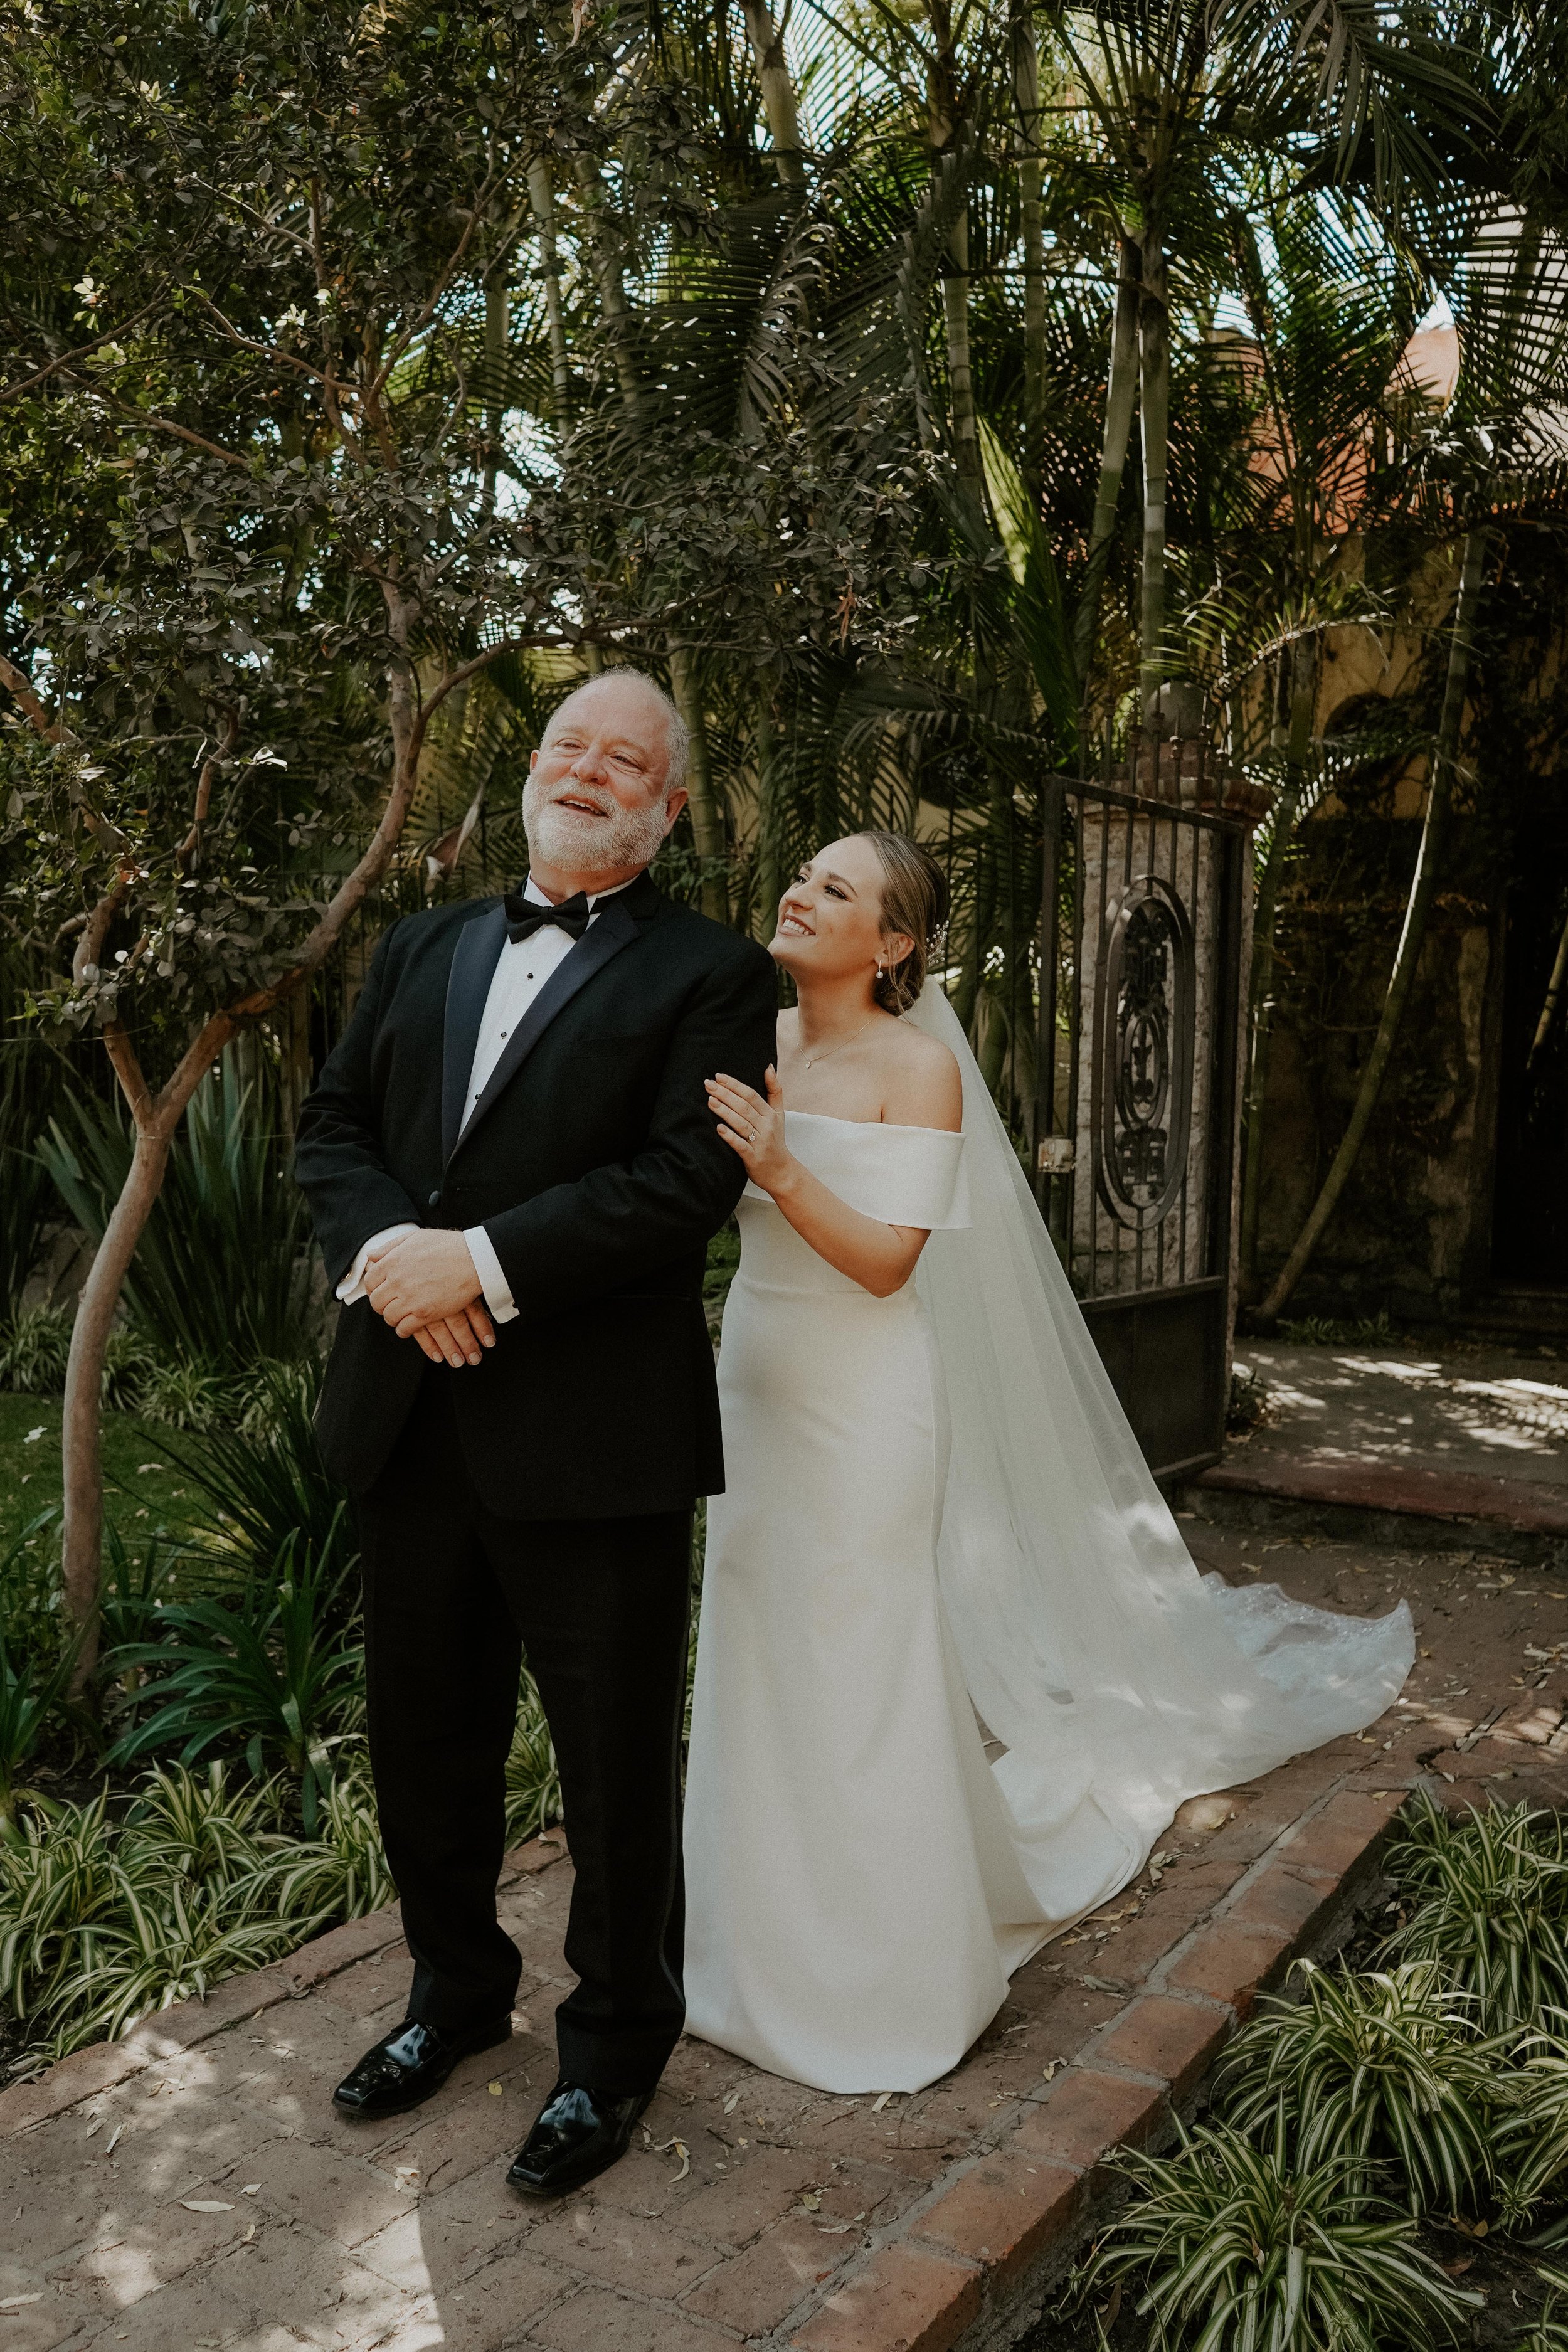 father of the bride first look in this stunning destination wedding featuring vagabond wedding dress.